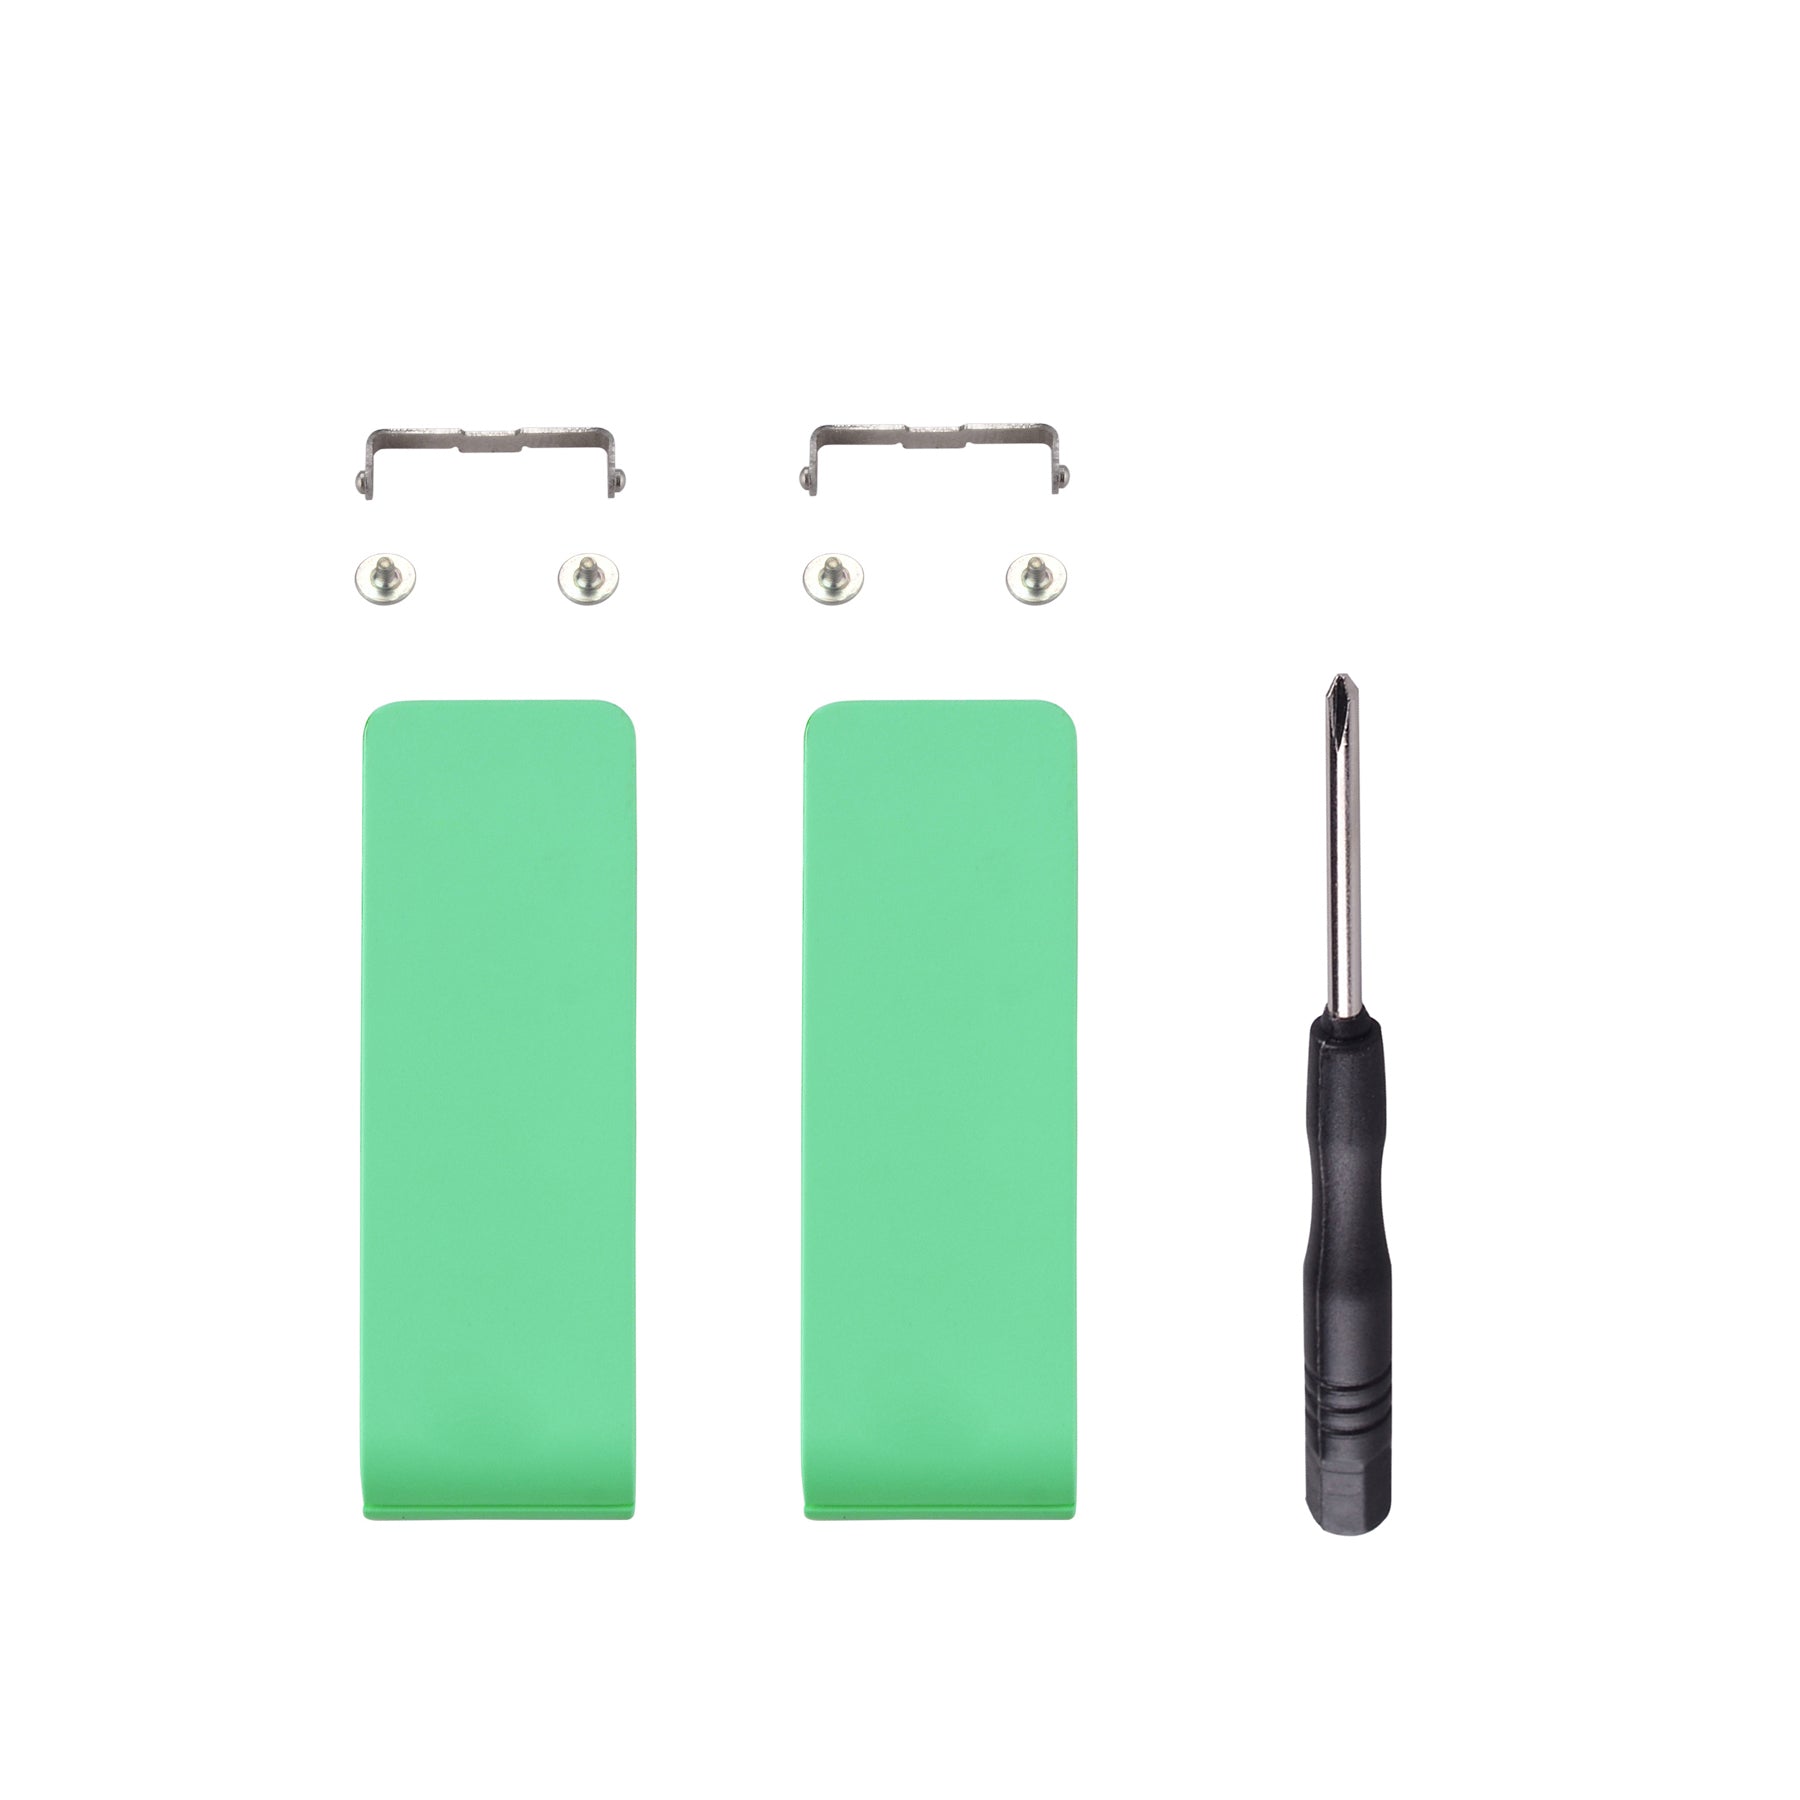 eXtremeRate Retail 2 Set of Mint Green Replacement Kickstand for Nintendo Switch Console, Back Bracket Holder Kick Stand for Nintendo Switch - Console NOT Included - AJ404